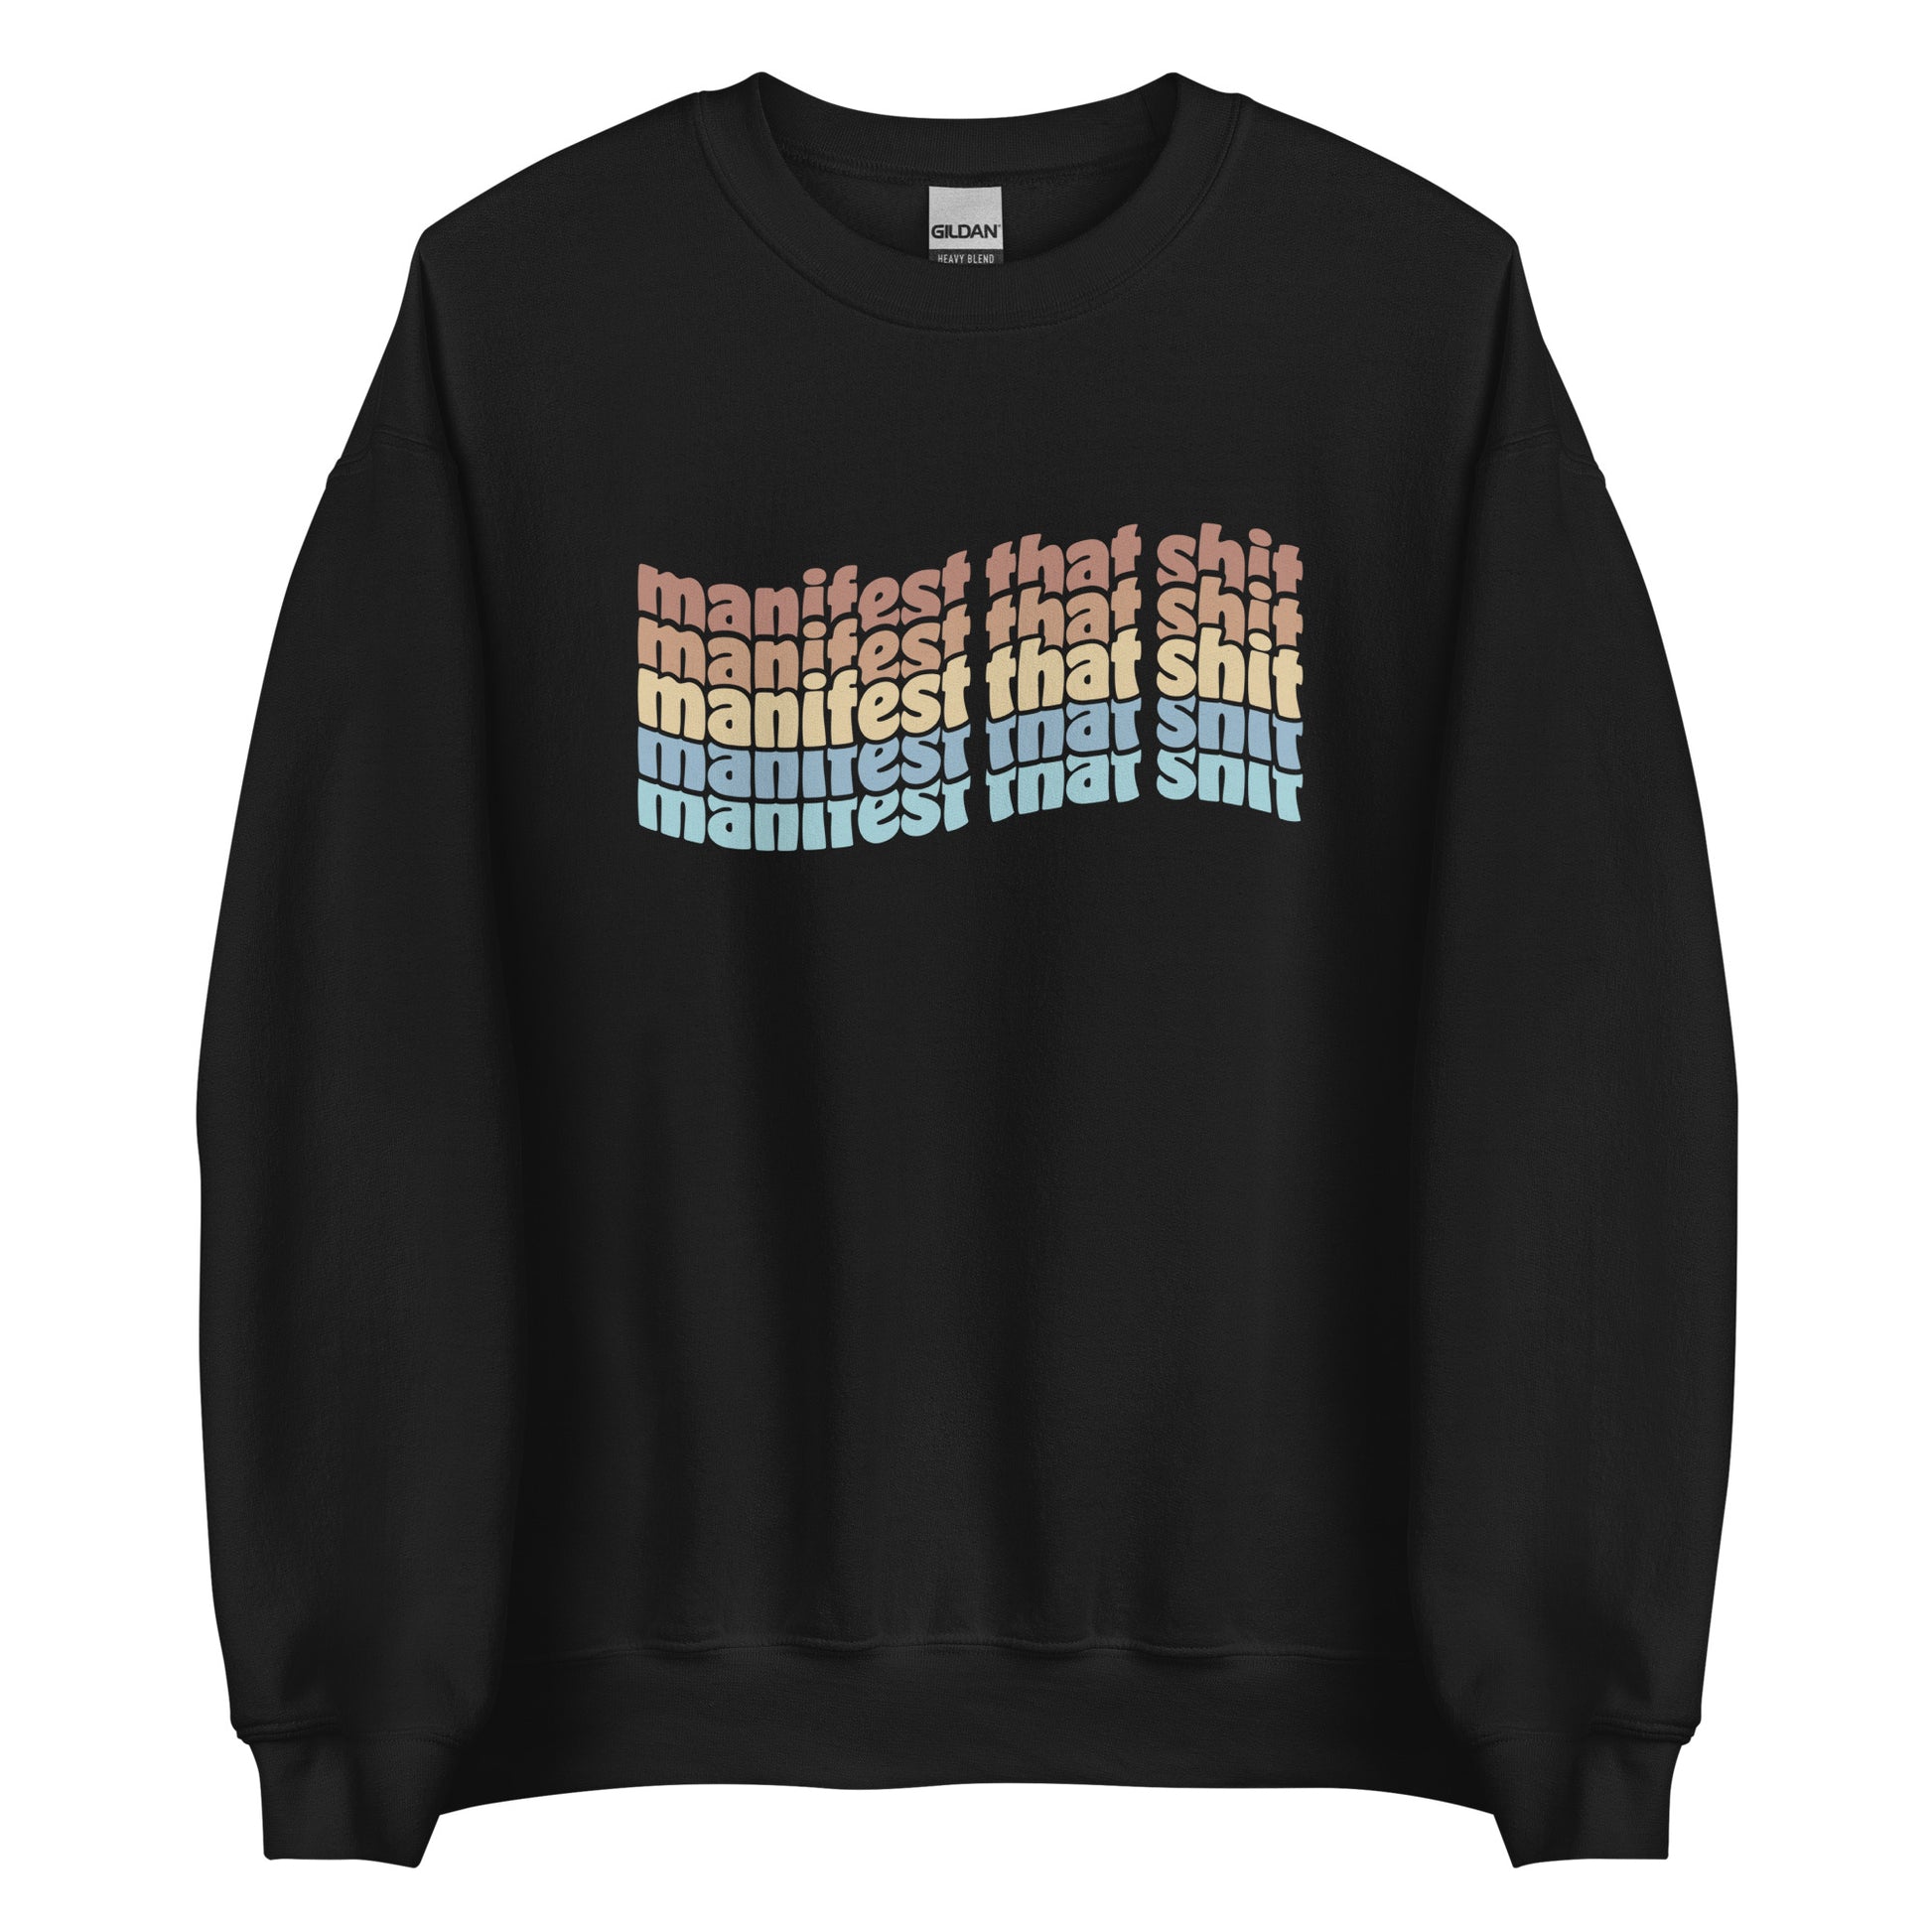 A black crewneck sweatshirt featuring stacked text that reads "manifest that shit" in a rainbow of colors.